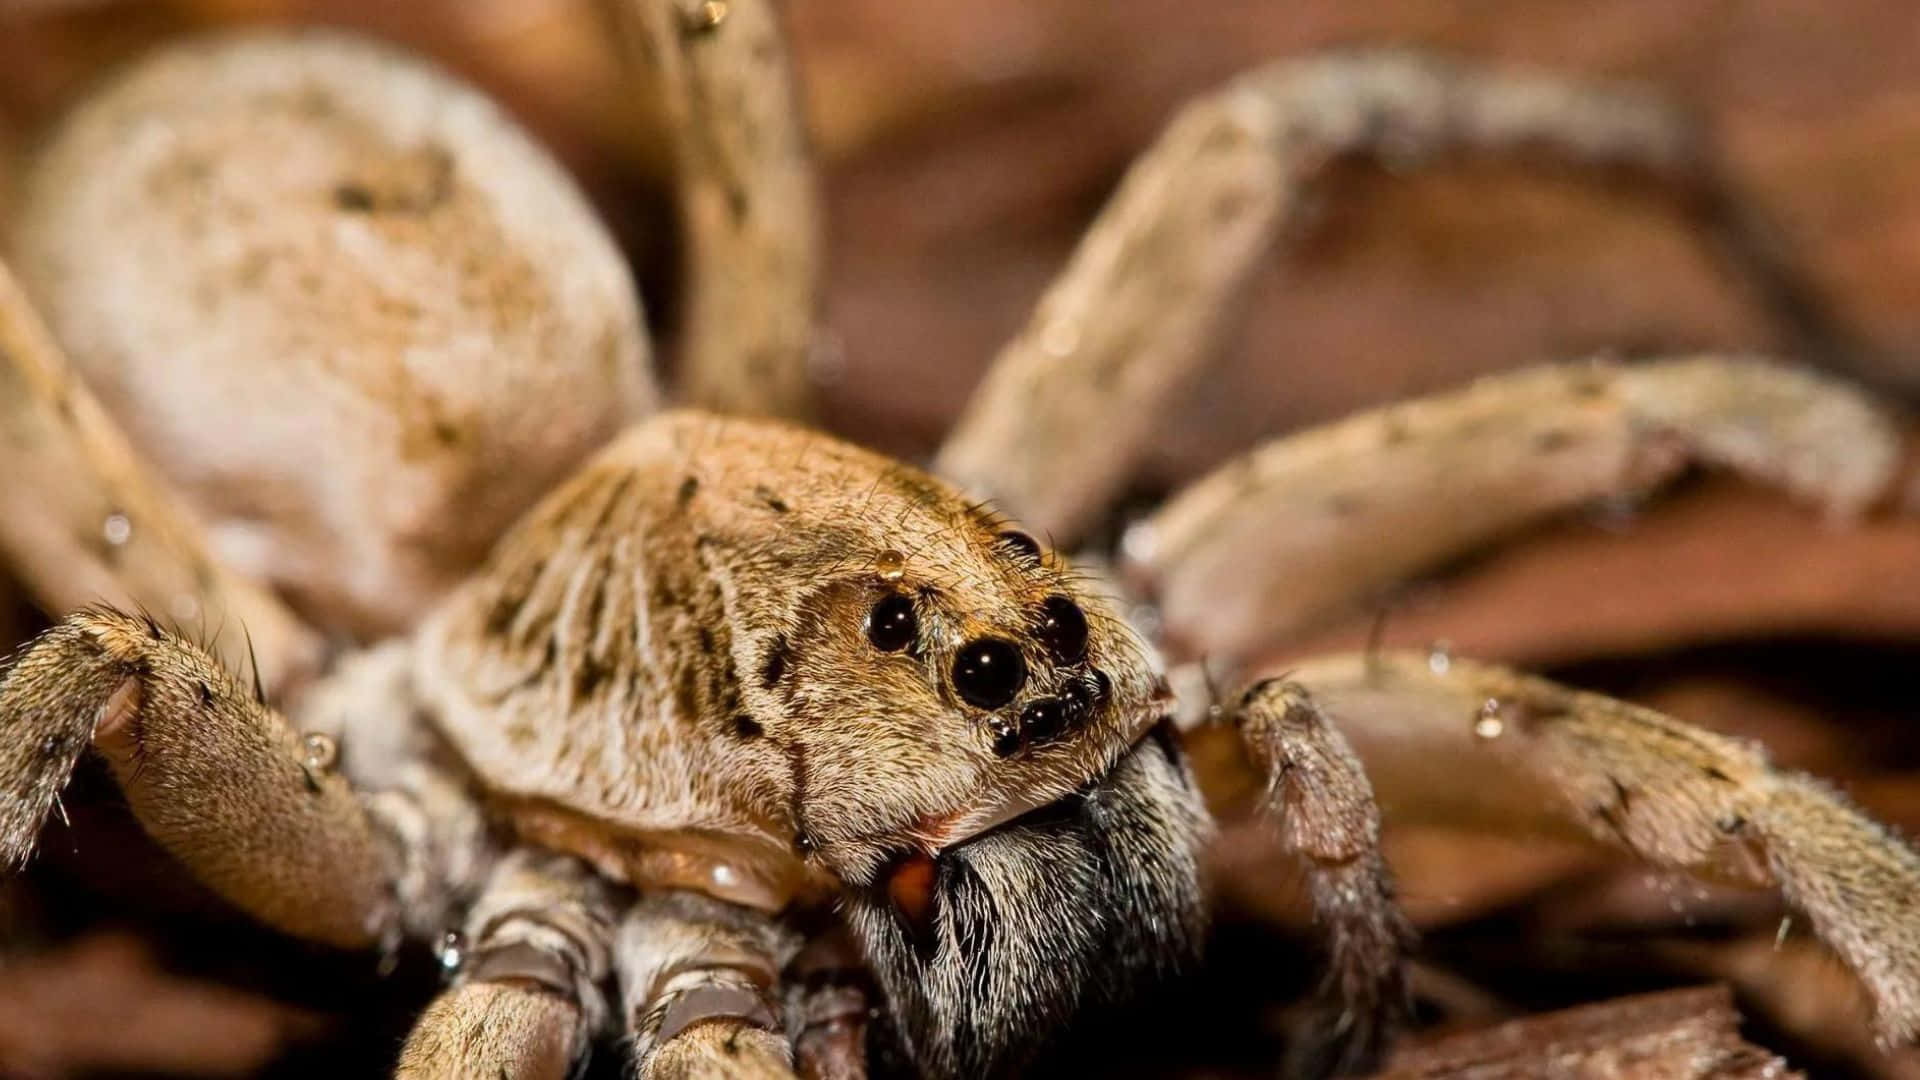 Up-close view of a Brown Recluse Spider in its habitat Wallpaper